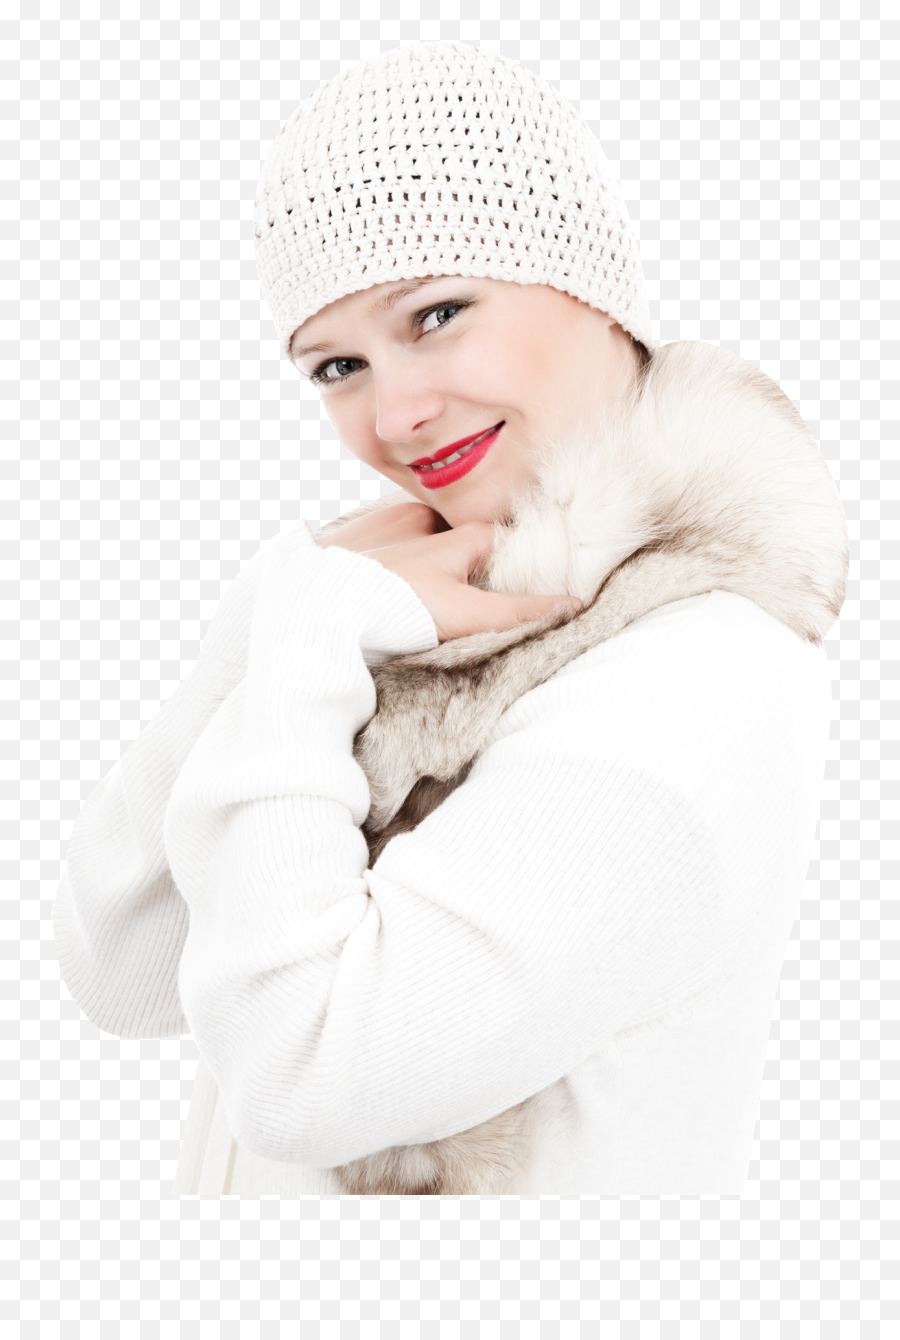 Woman In Warm Winter Clothes Png Image - Pngpix,Clothes Png